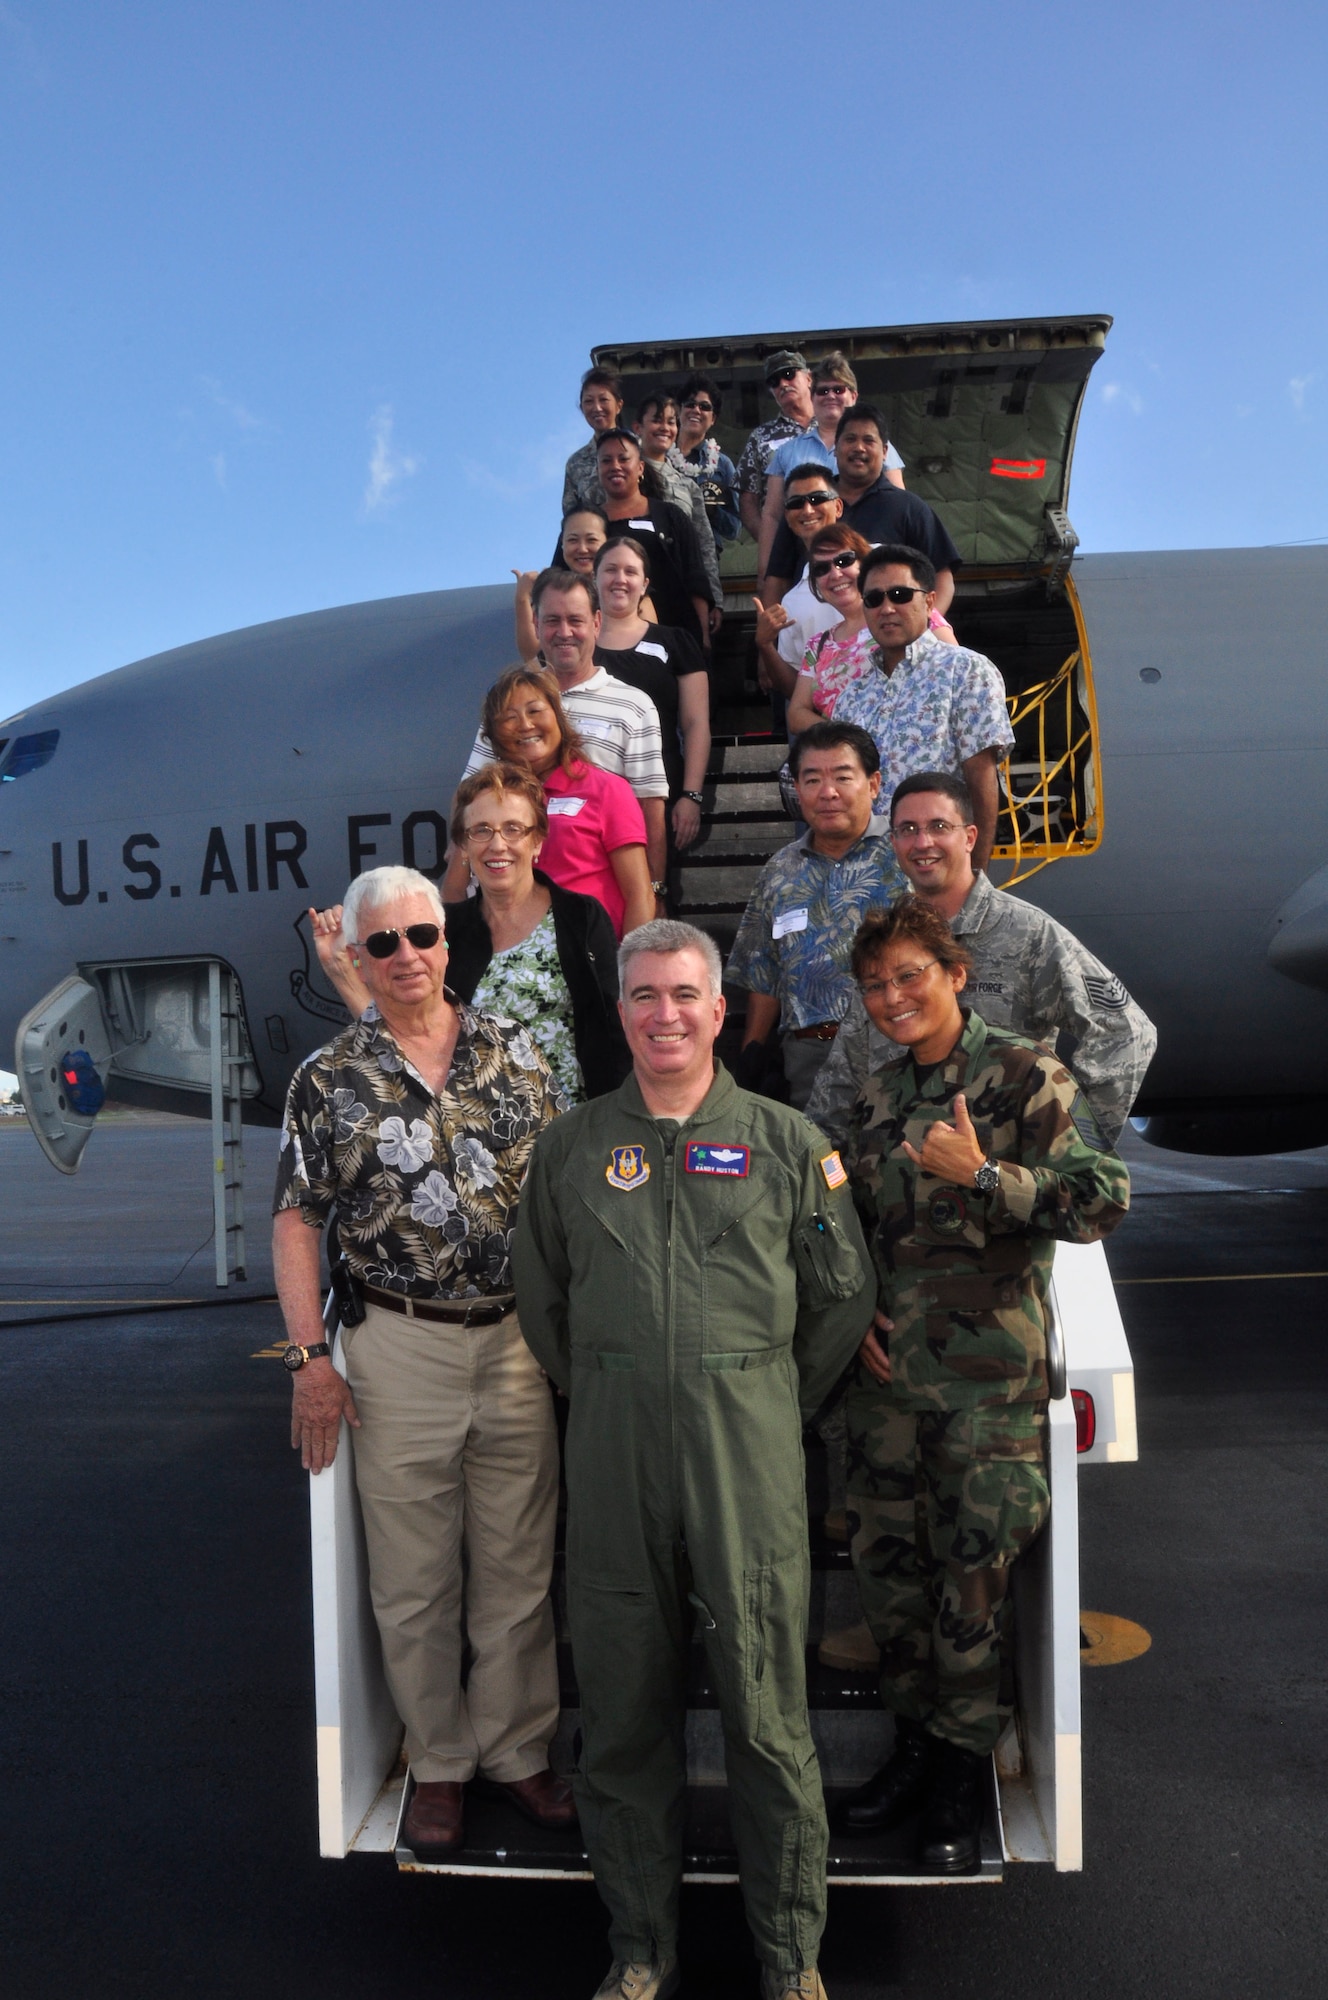 Col. Robert “Randy” Huston, 624th Regional Support Group commander, leads a contingent of Reservists and their employers for the Group’s first-ever Employer Support Flight at Hickam Air Force Base, Hawaii Nov. 8. The event, held in co-operation with the Hawaii Committee of Employer Support for the Guard and Reserve, helped employers better understand the time and sacrifice their employees invest in their role as Air Force Reservists. Civilian bosses of Group Reservists flew aboard an Air Force Reserve KC-135 Stratotanker and witnessed an in-flight refueling of Hawaii Air National Guard F-15 Eagles. The KC-135 used for Saturday's Employer Support Flight is assigned to the 452nd Air Mobility Wing at March Air Reserve Base, Calif. (Air Force photo/Master Sgt. Daniel Nathaniel)